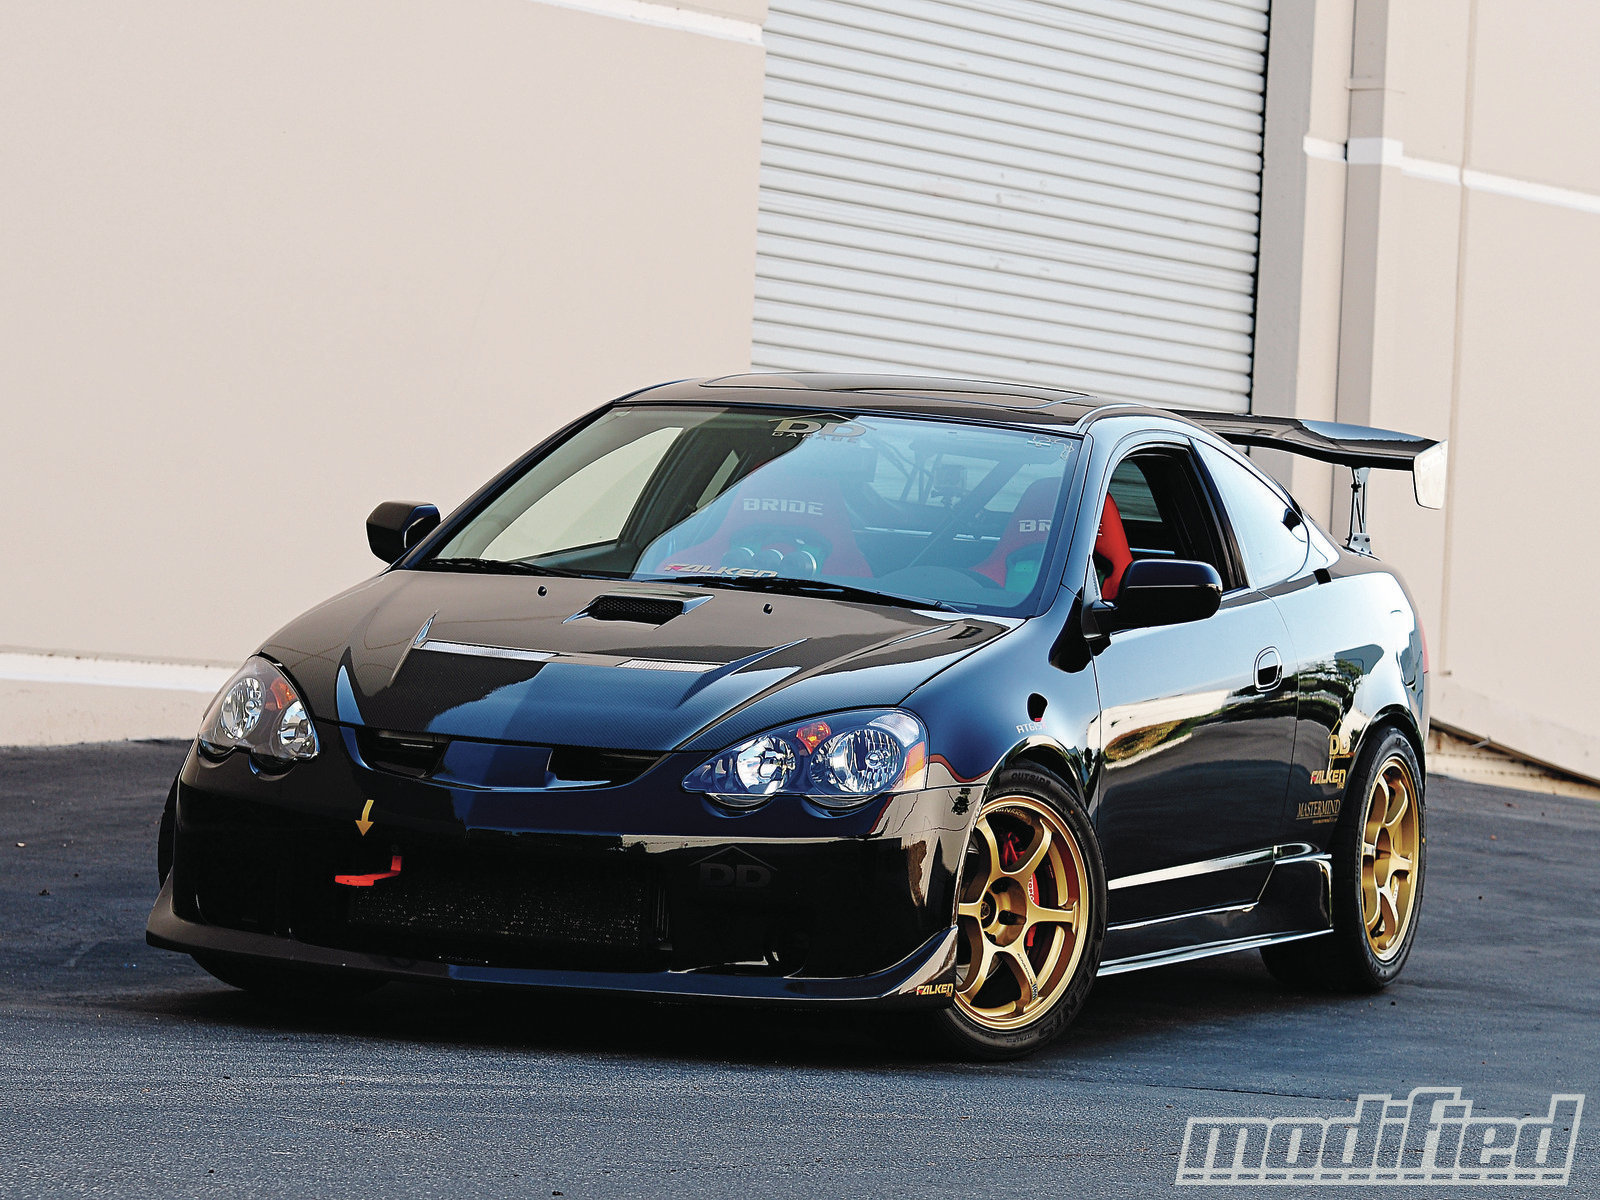 2004 Acura RSX Type-S - All The Right Cues